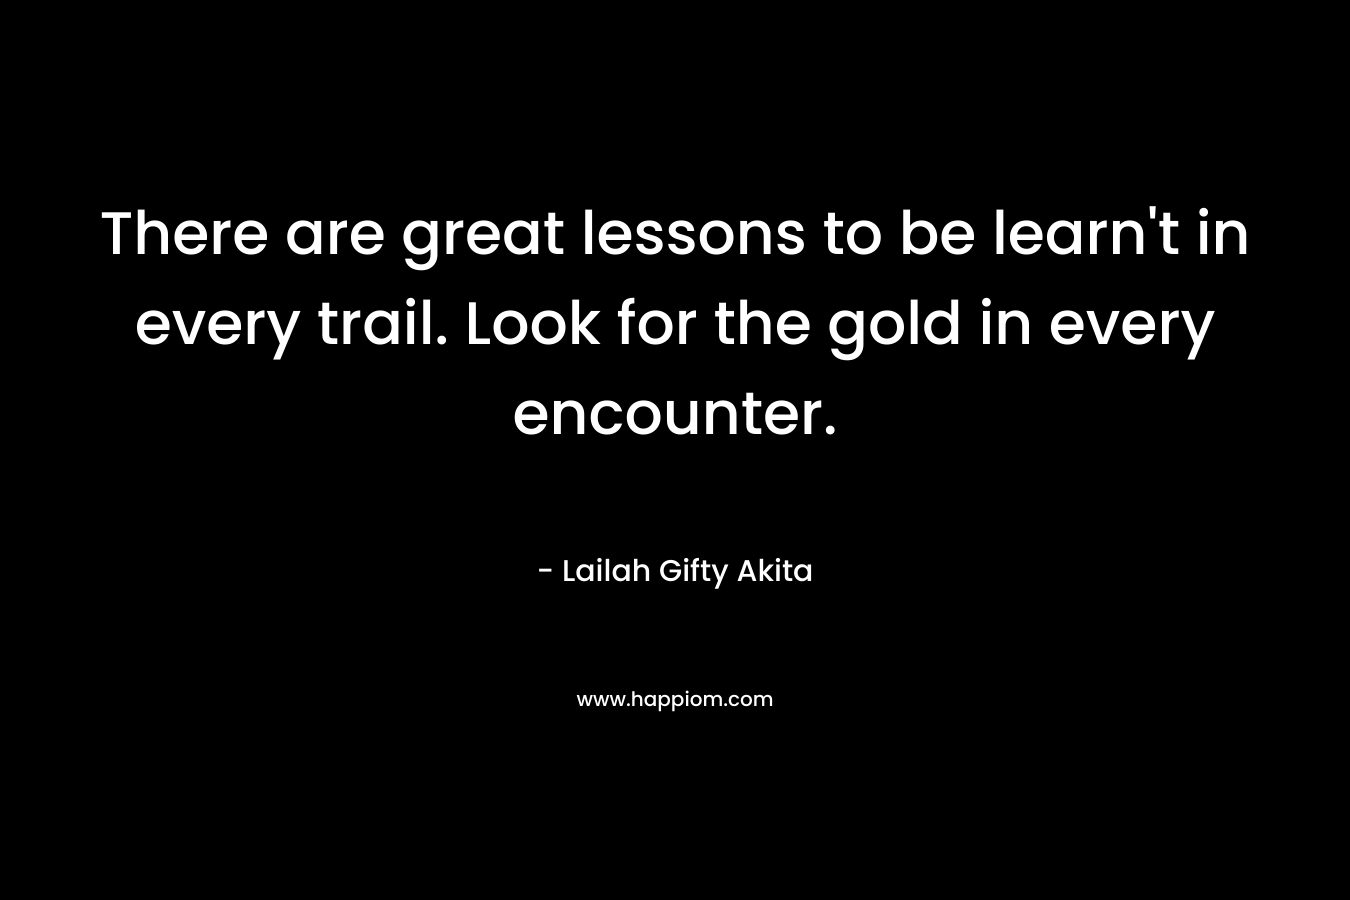 There are great lessons to be learn't in every trail. Look for the gold in every encounter.